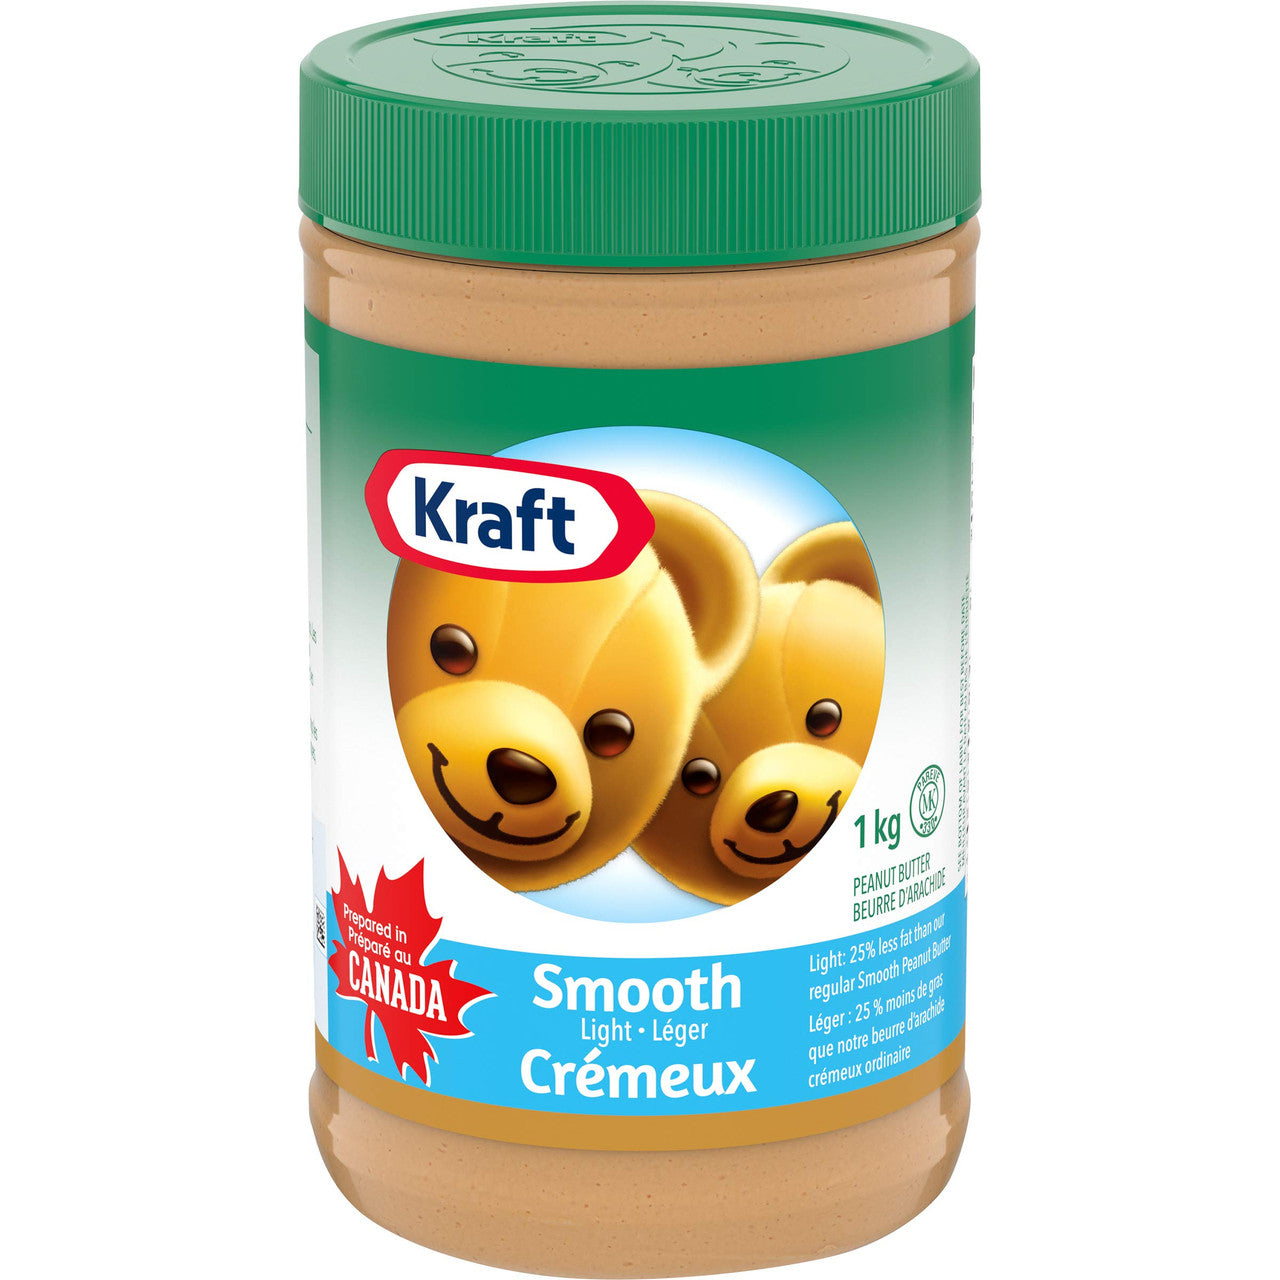 Why Kraft Peanut Butter launched a social variety show » Media in Canada